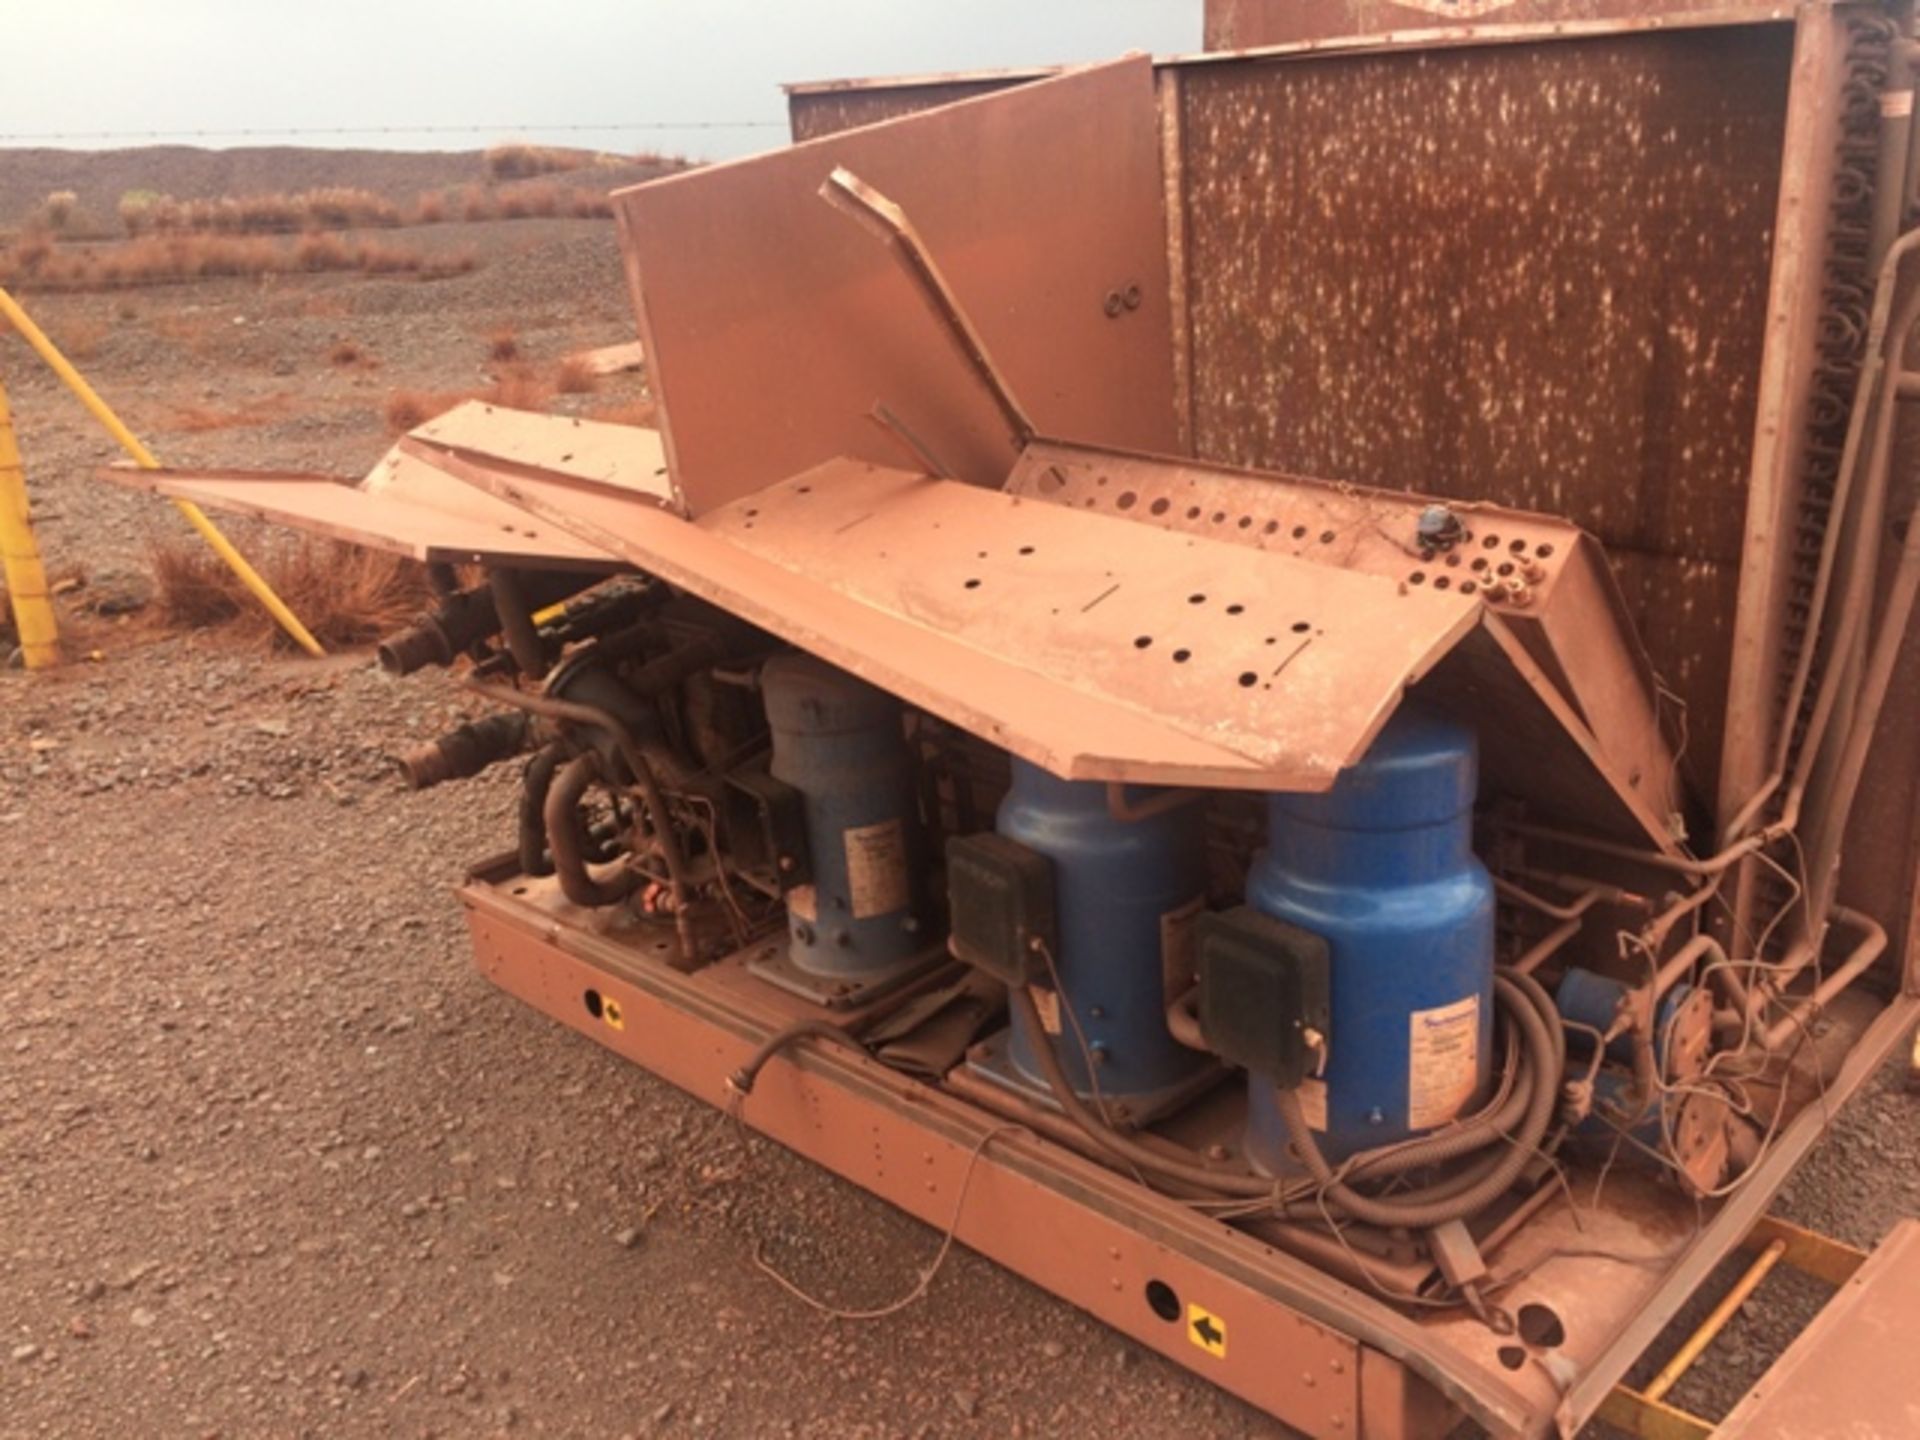 INDUSTRIAL AIR CONDITIONER (STRIPPED) WITH COMPRESSOR, COOLING TOWER & MOTORS BEESHOEK MINE